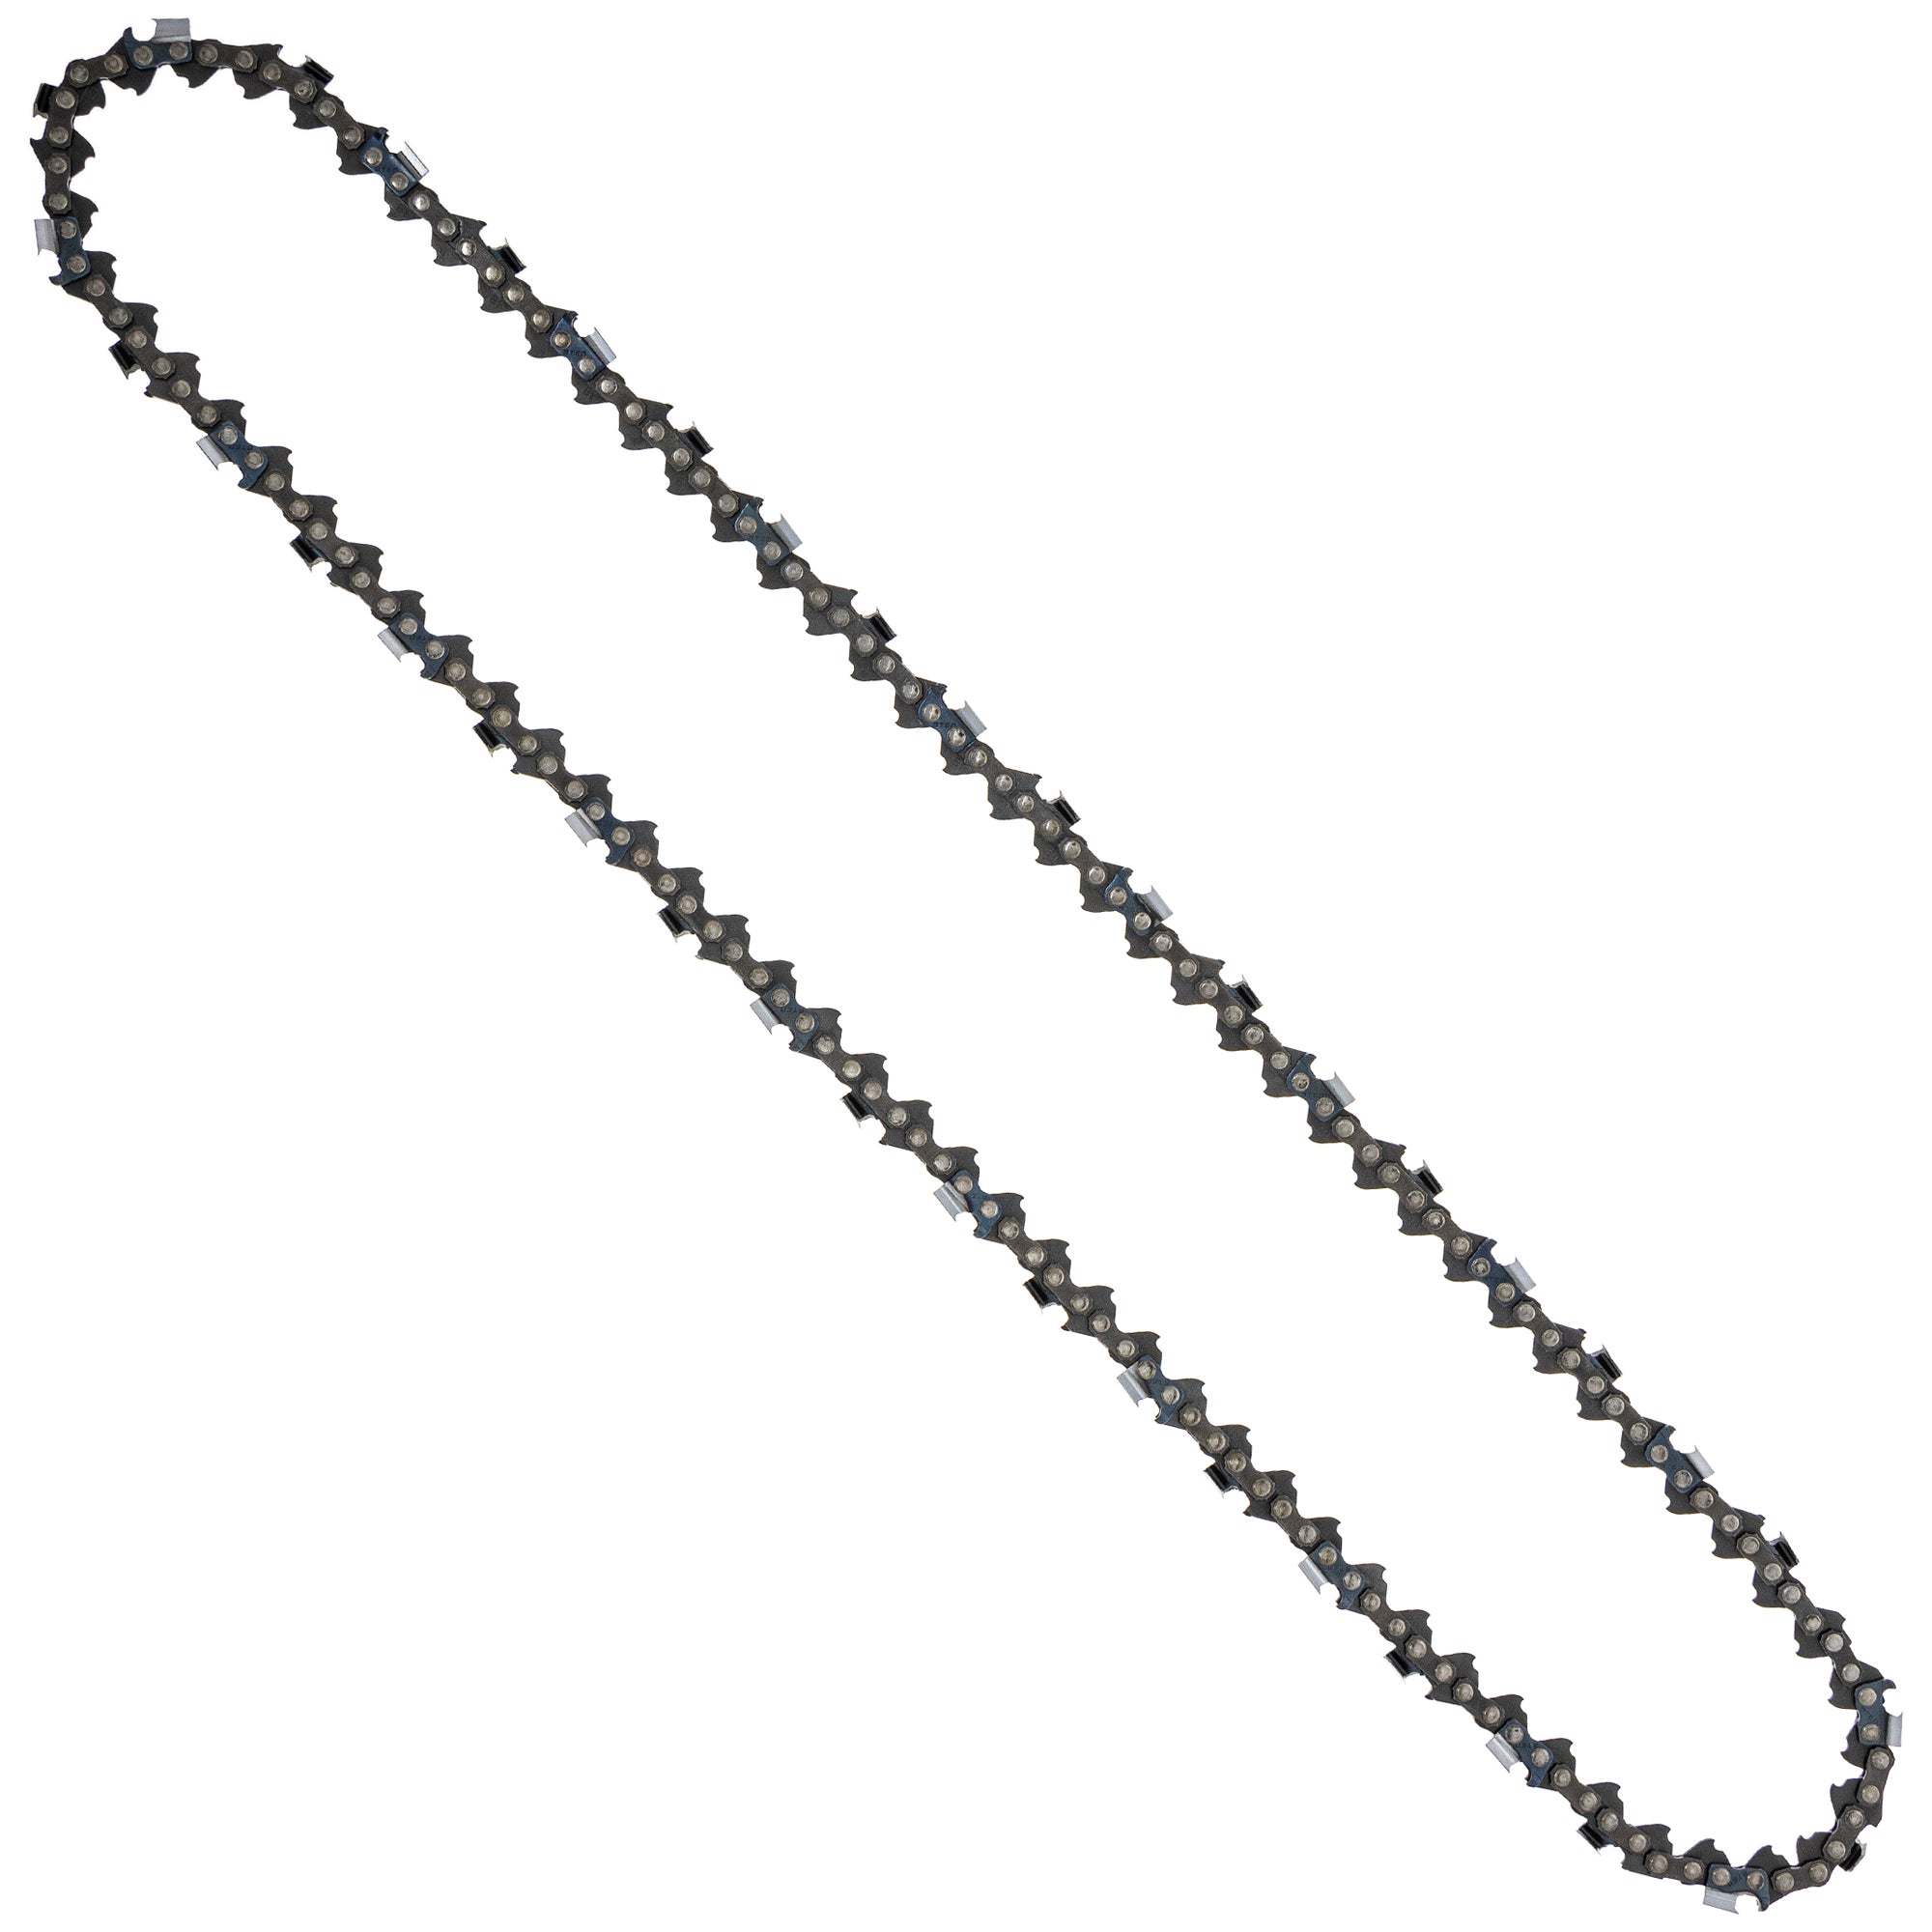 8TEN 810-CCC2310H Chain 4-Pack for zOTHER Oregon MS 634 30 040